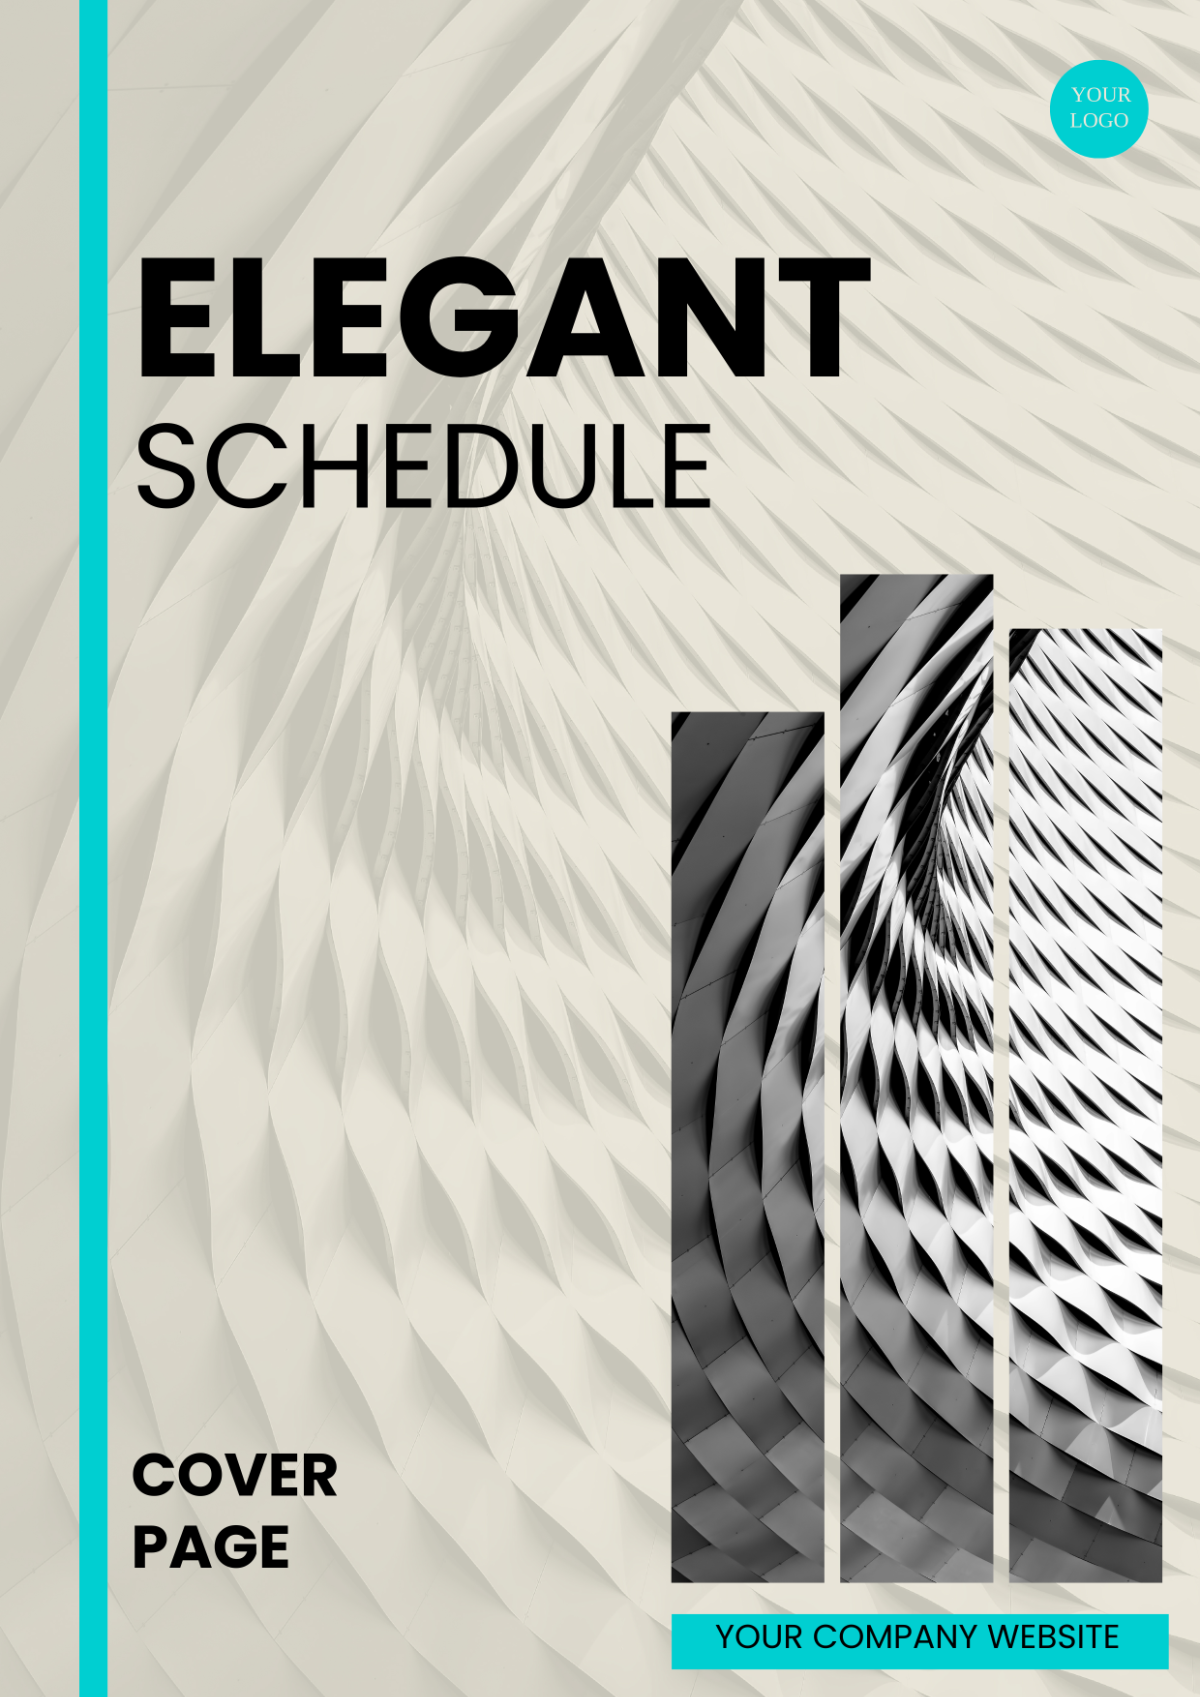 Elegant Schedule Cover Page